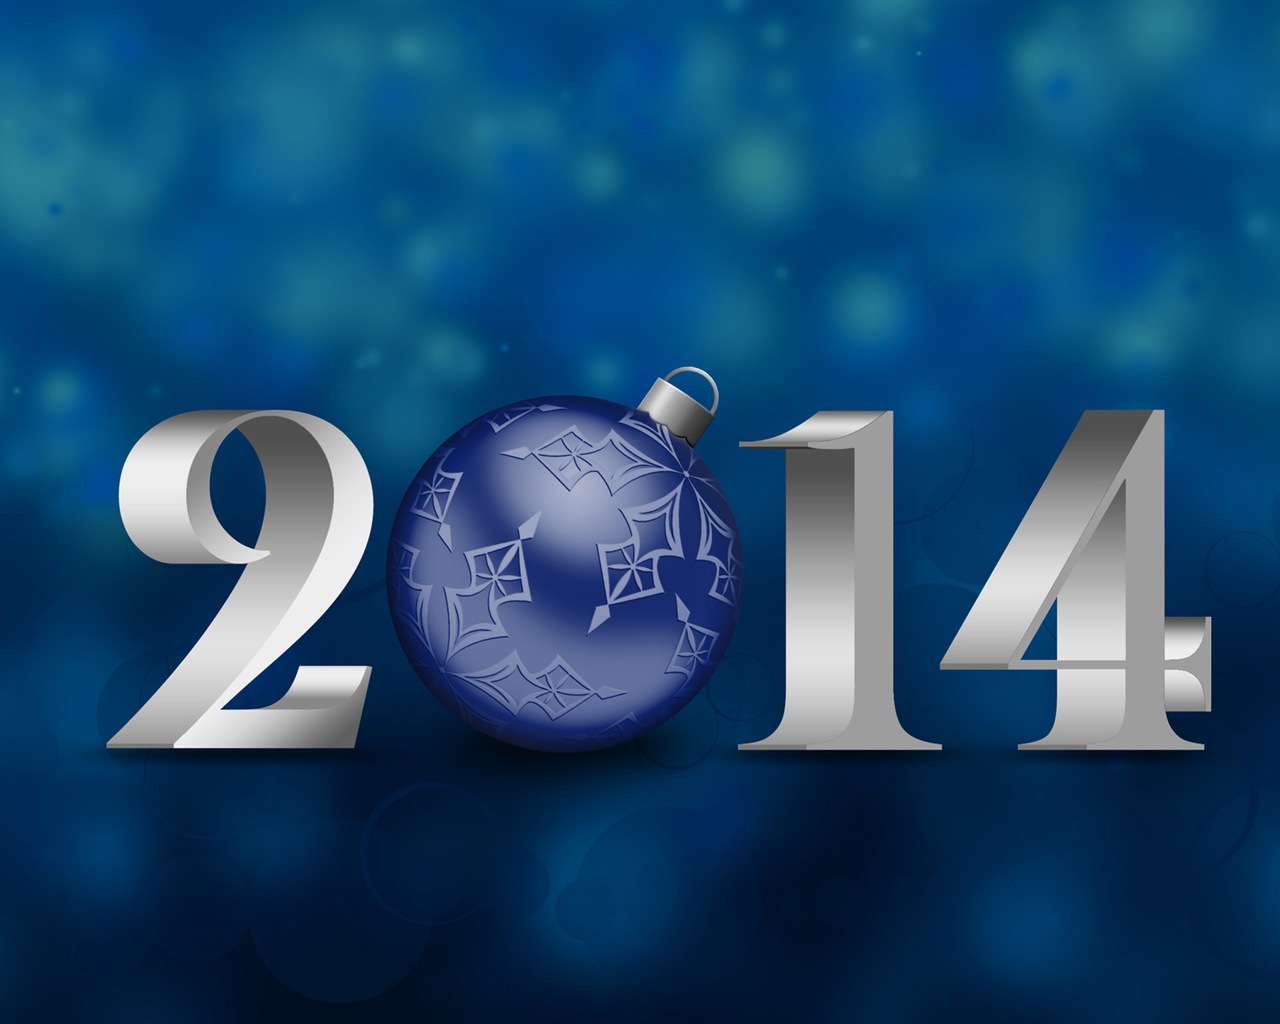 2014 New Year Theme HD Wallpapers (1) #5 - 1280x1024